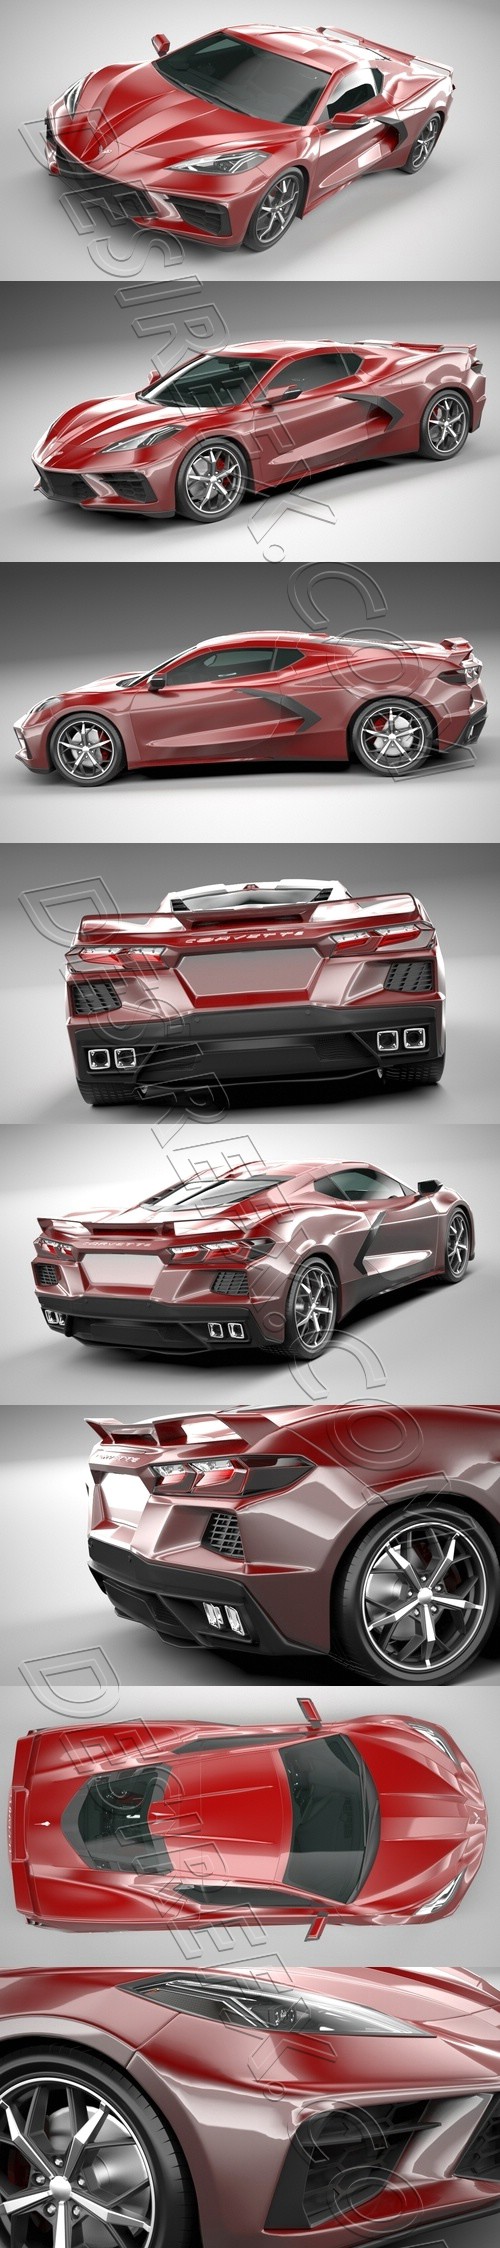 Chevrolet Corvette Stingray with HQ interior and Engine 2020 3D Model